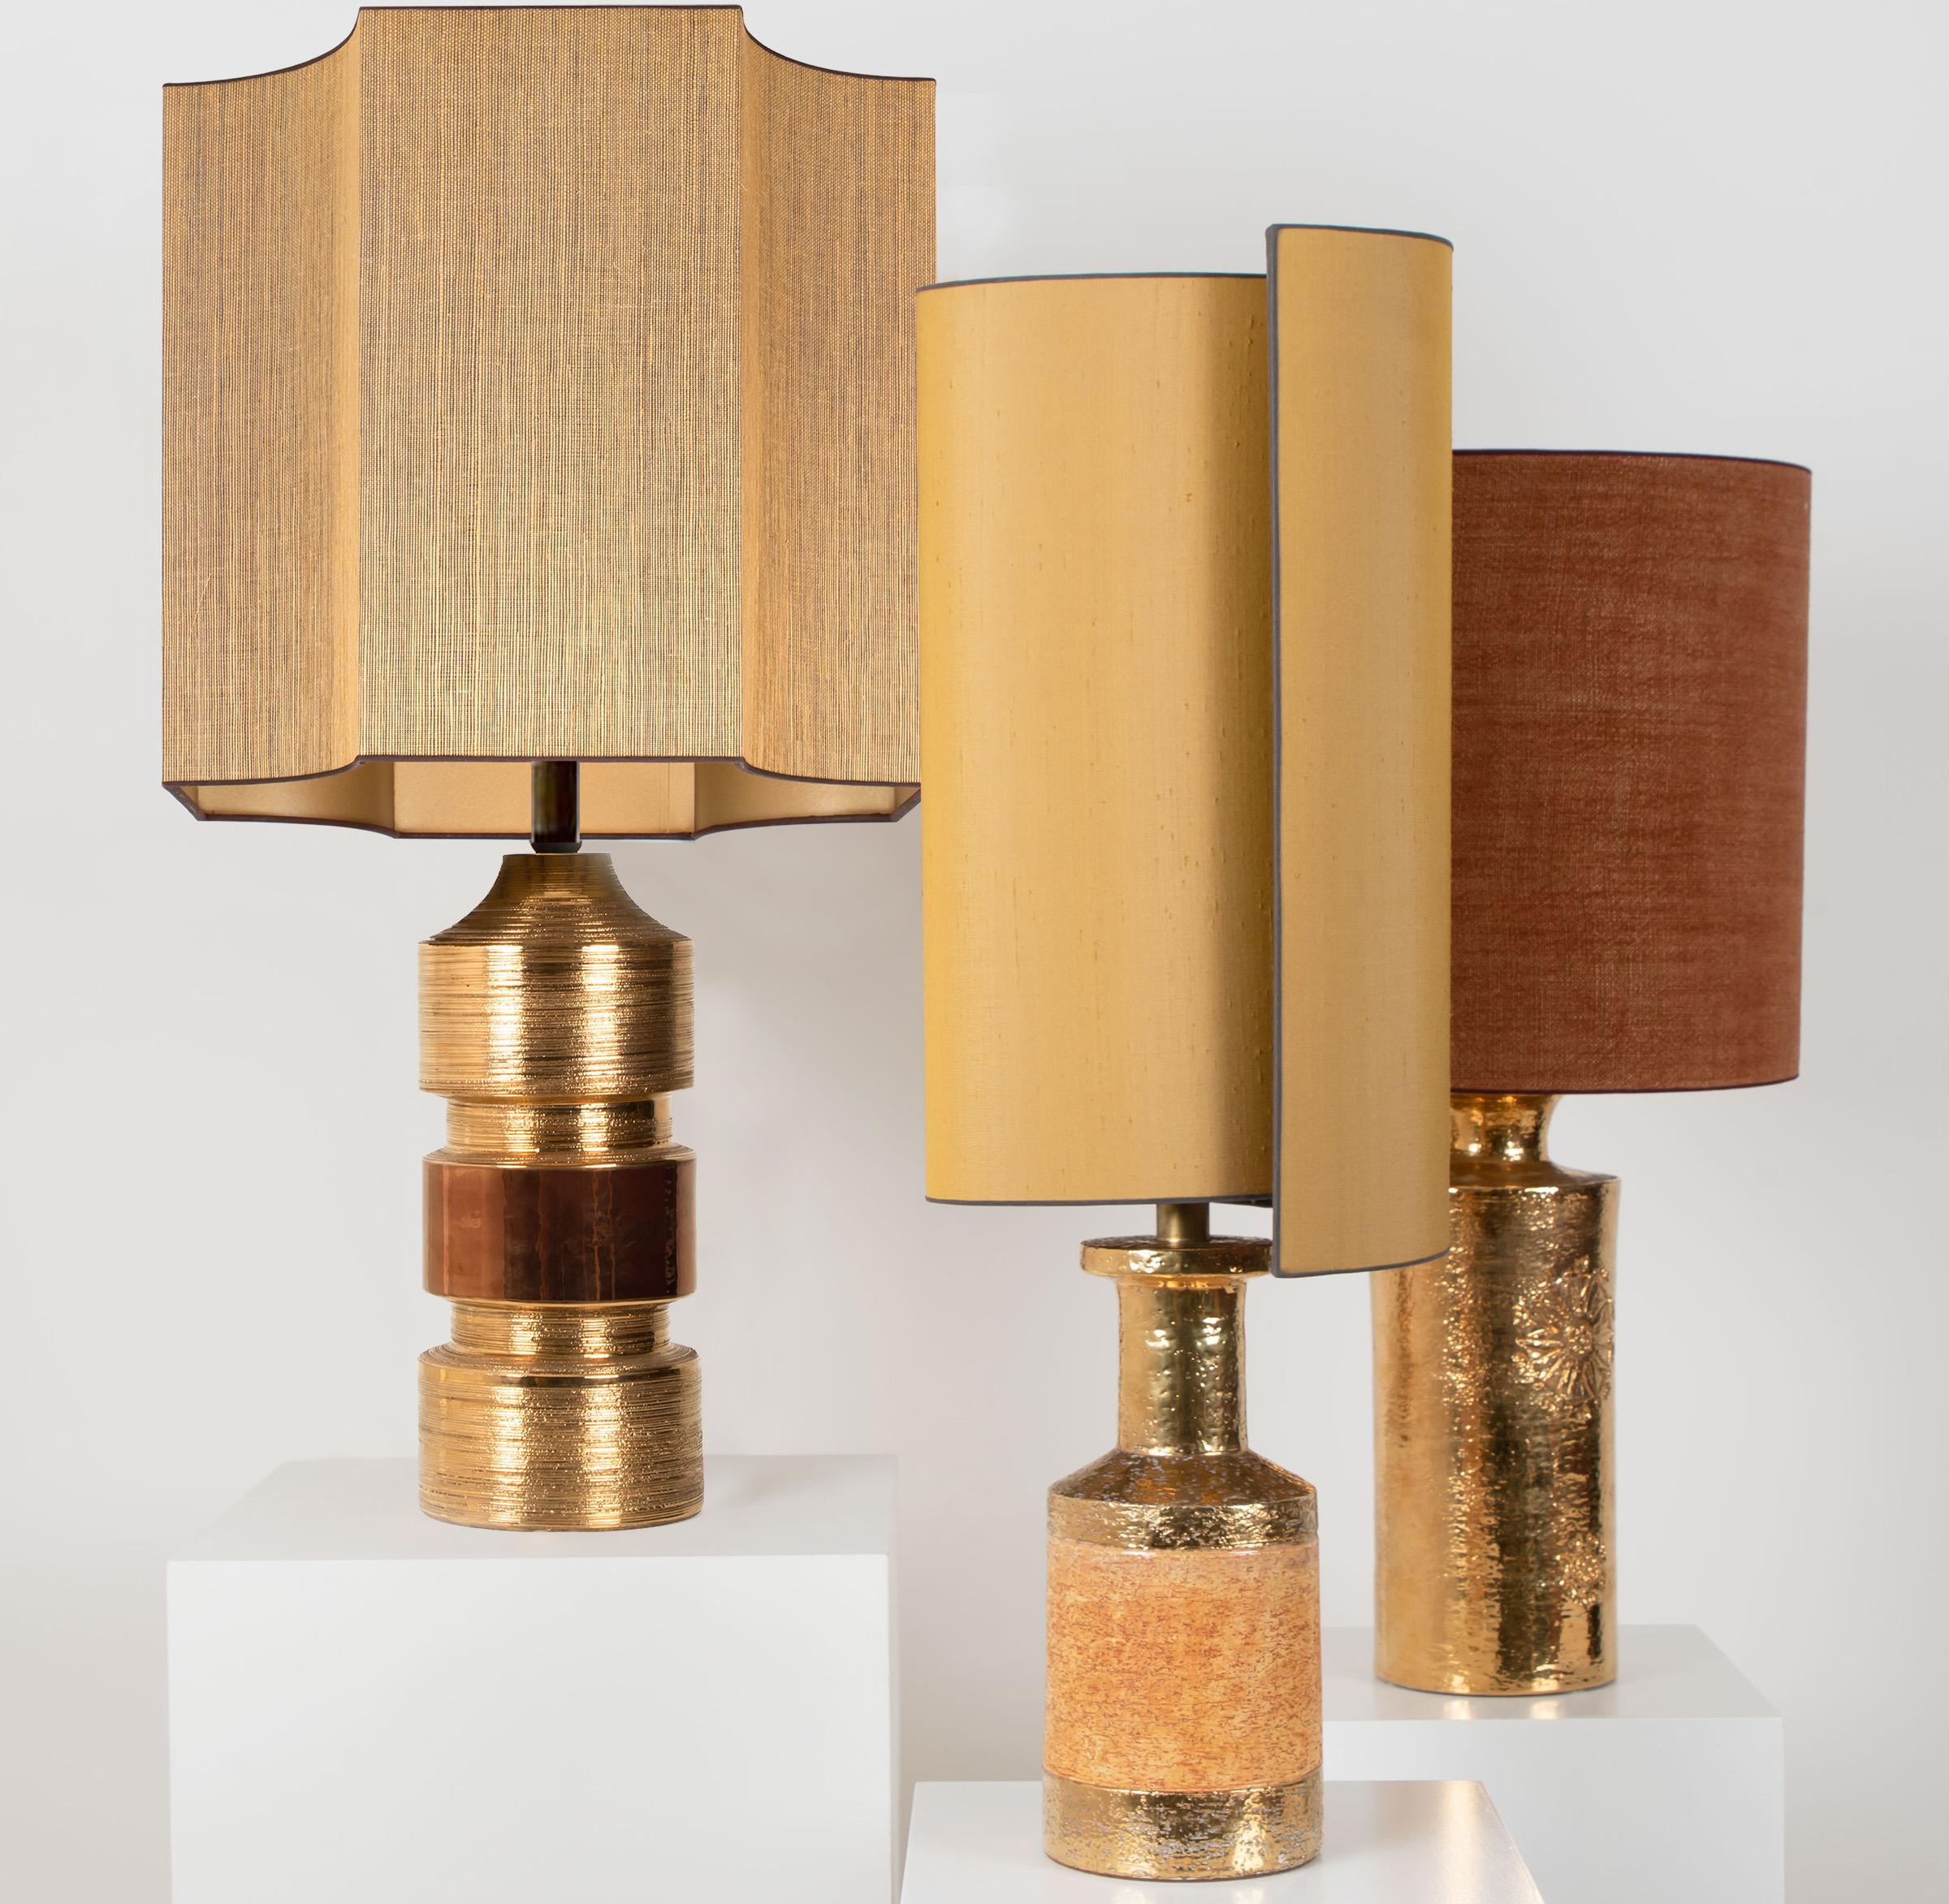 Pair of Bitossi Lamps for Bergboms, with Custom Made Shades by Rene Houben For Sale 1